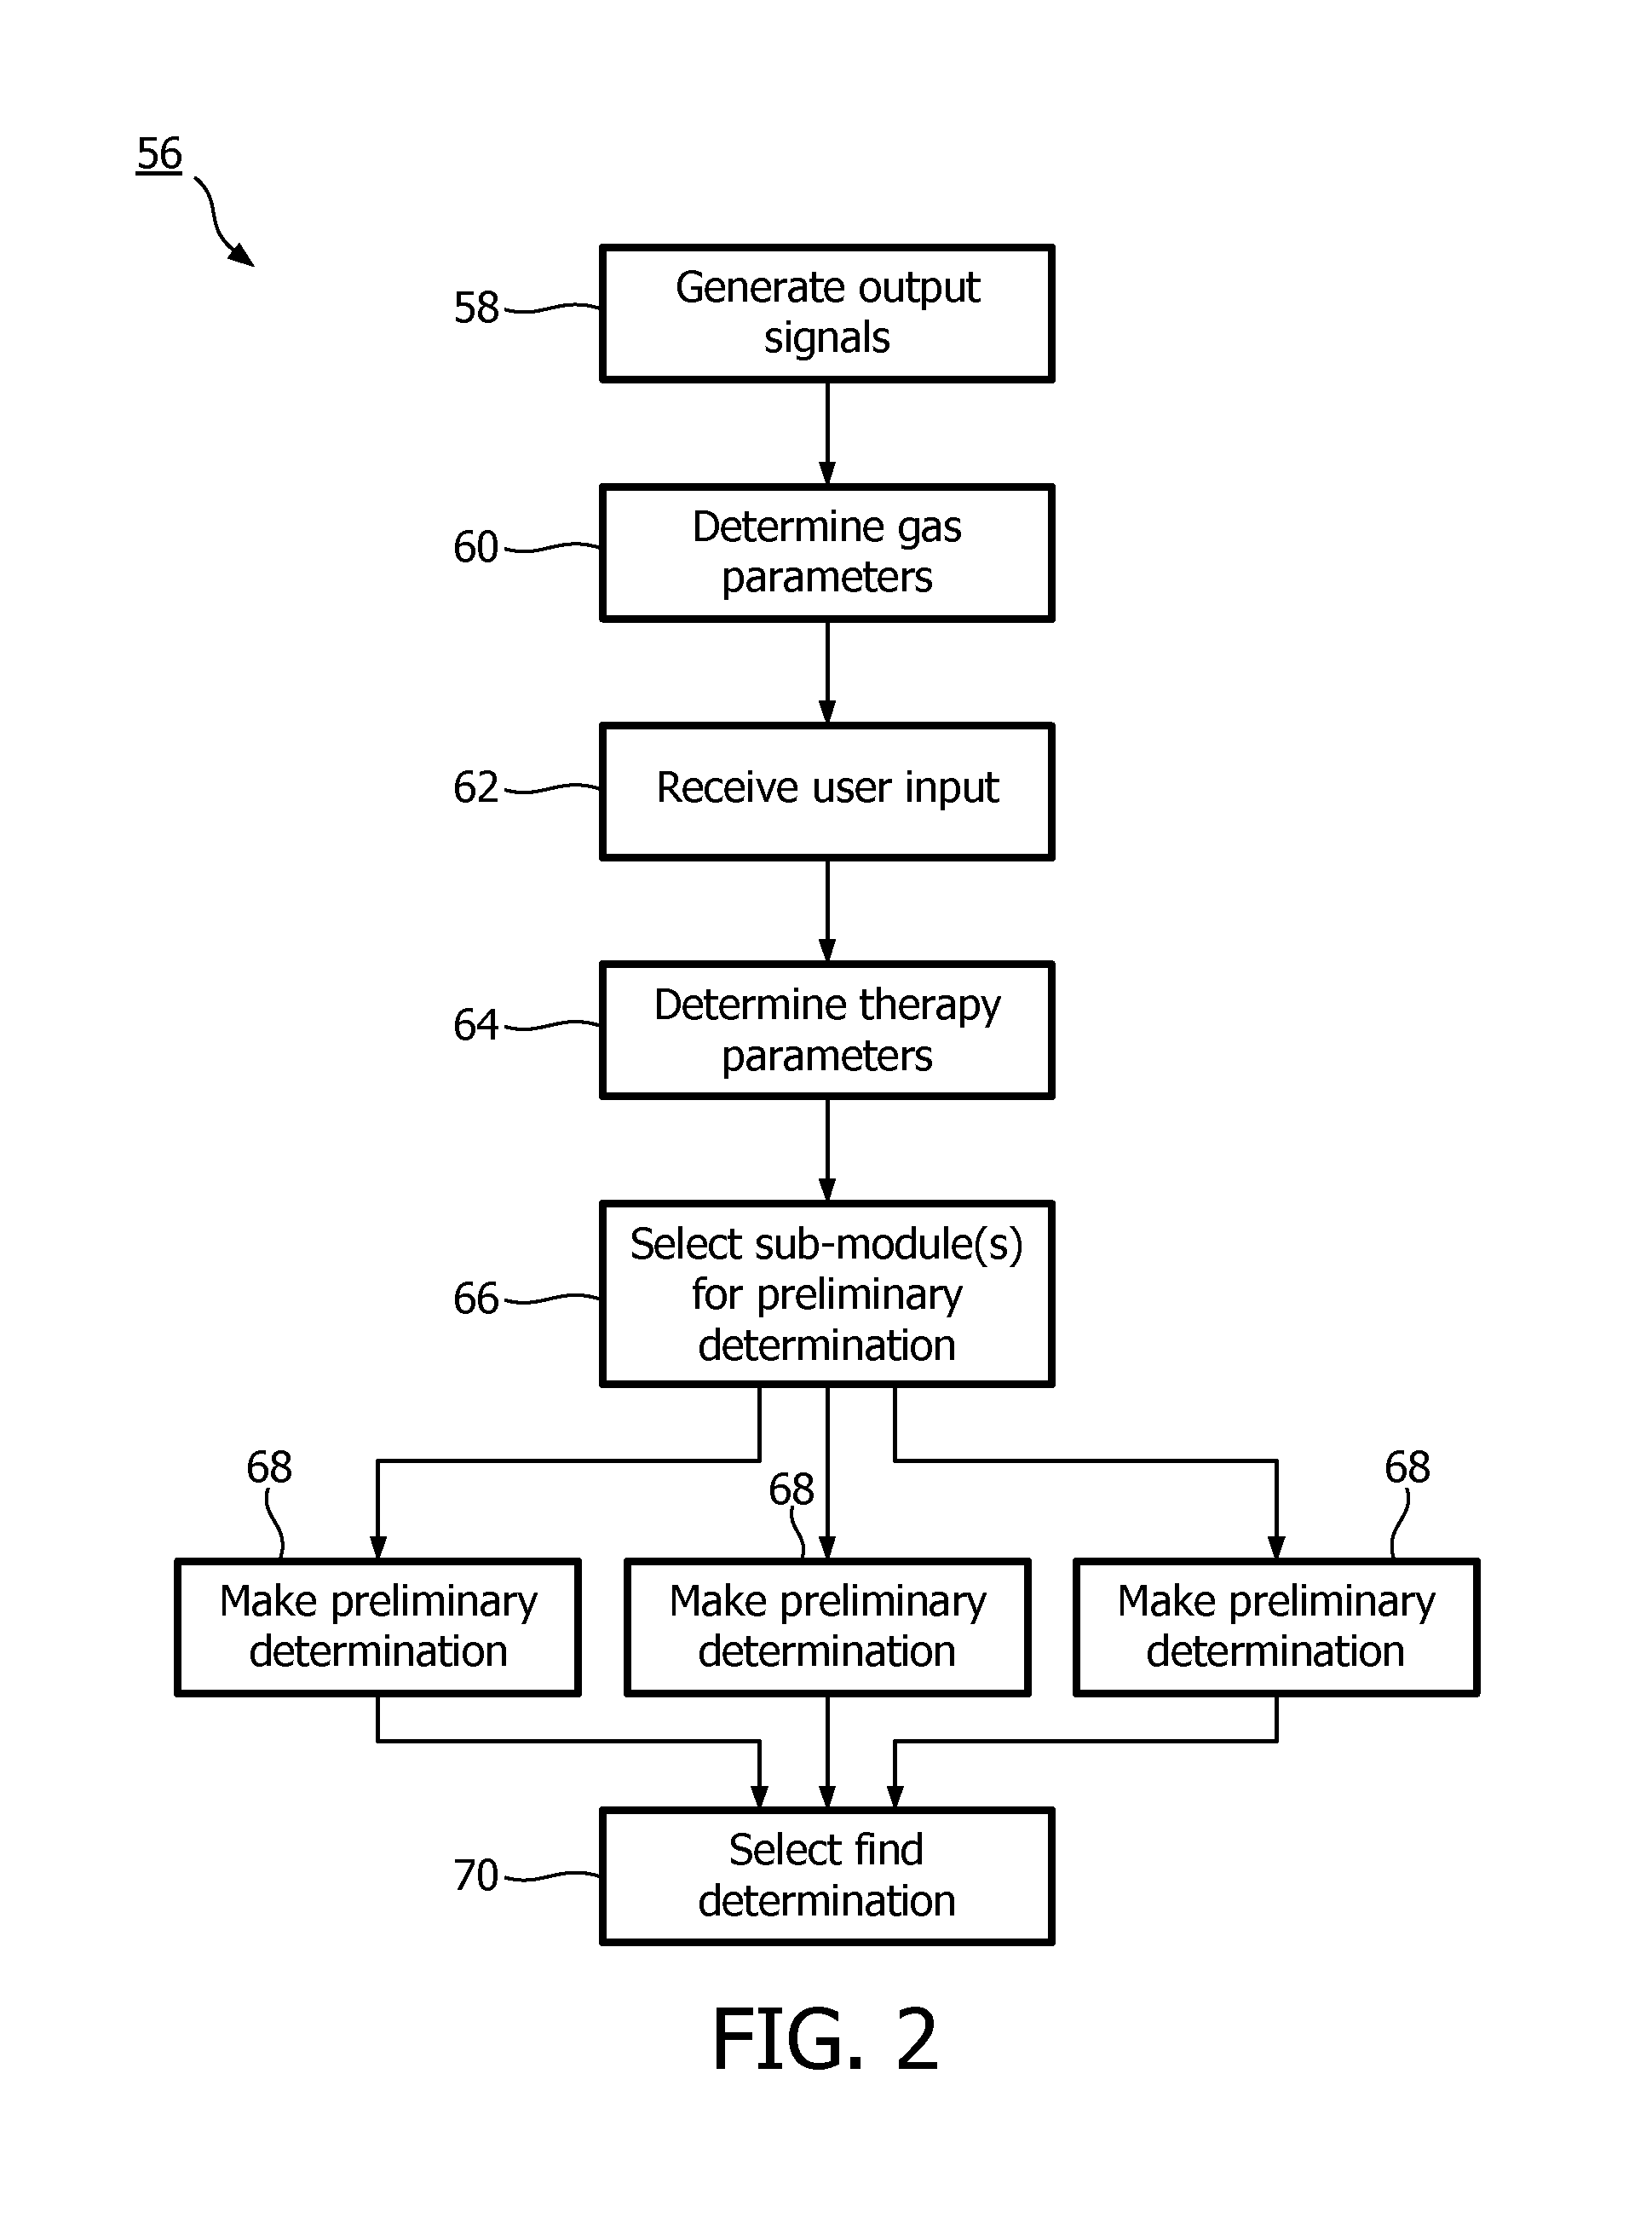 System and method for determining one or more breathing parameters of a subject